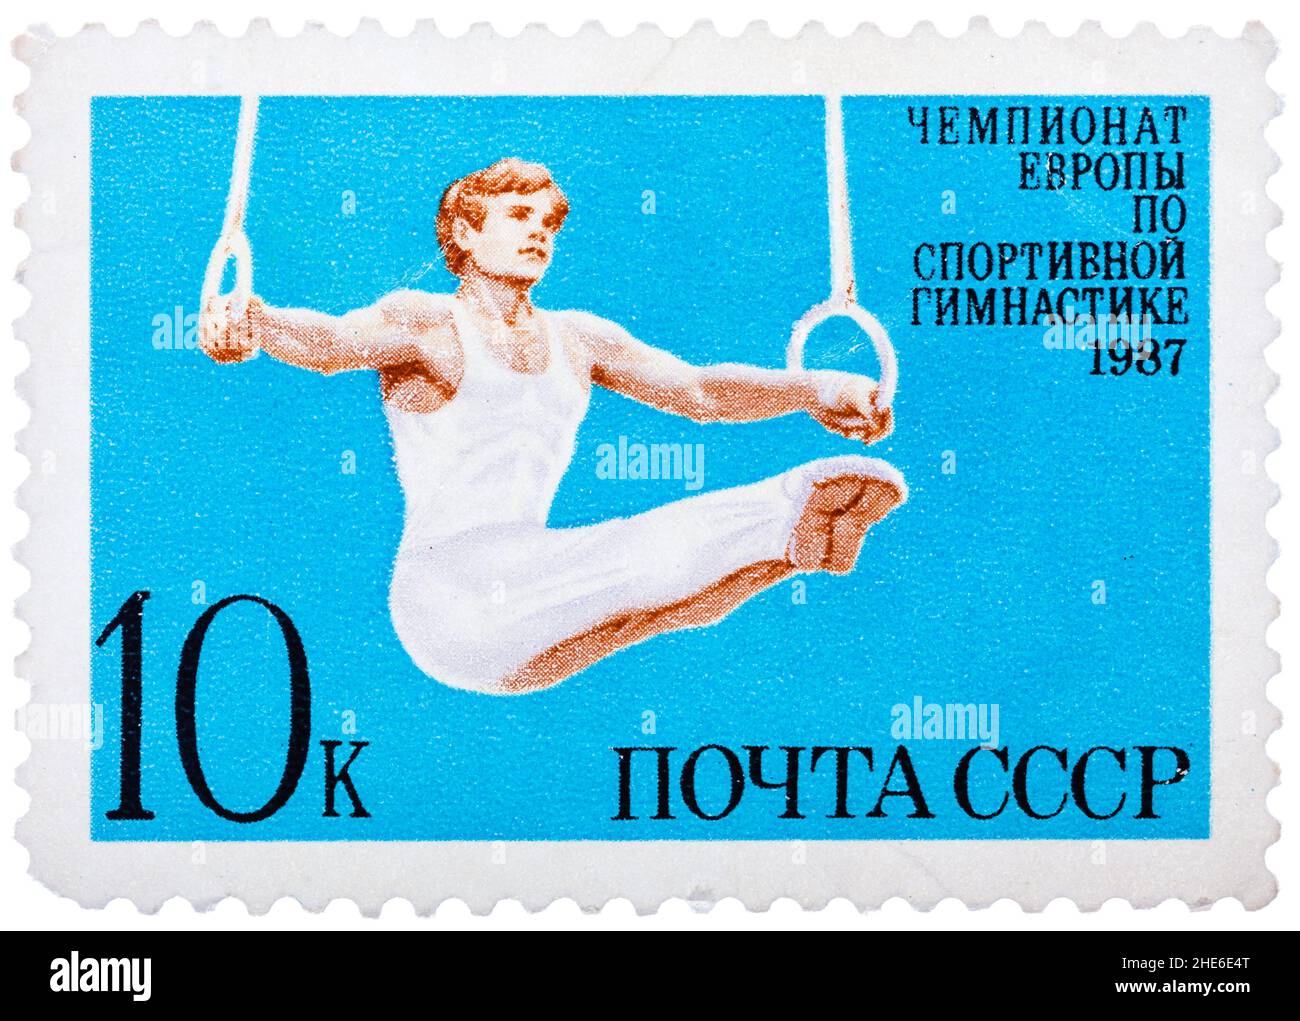 Stamp printed by USSR shows gymnast, European Gymnastics Championships, Moscow 1987 Stock Photo